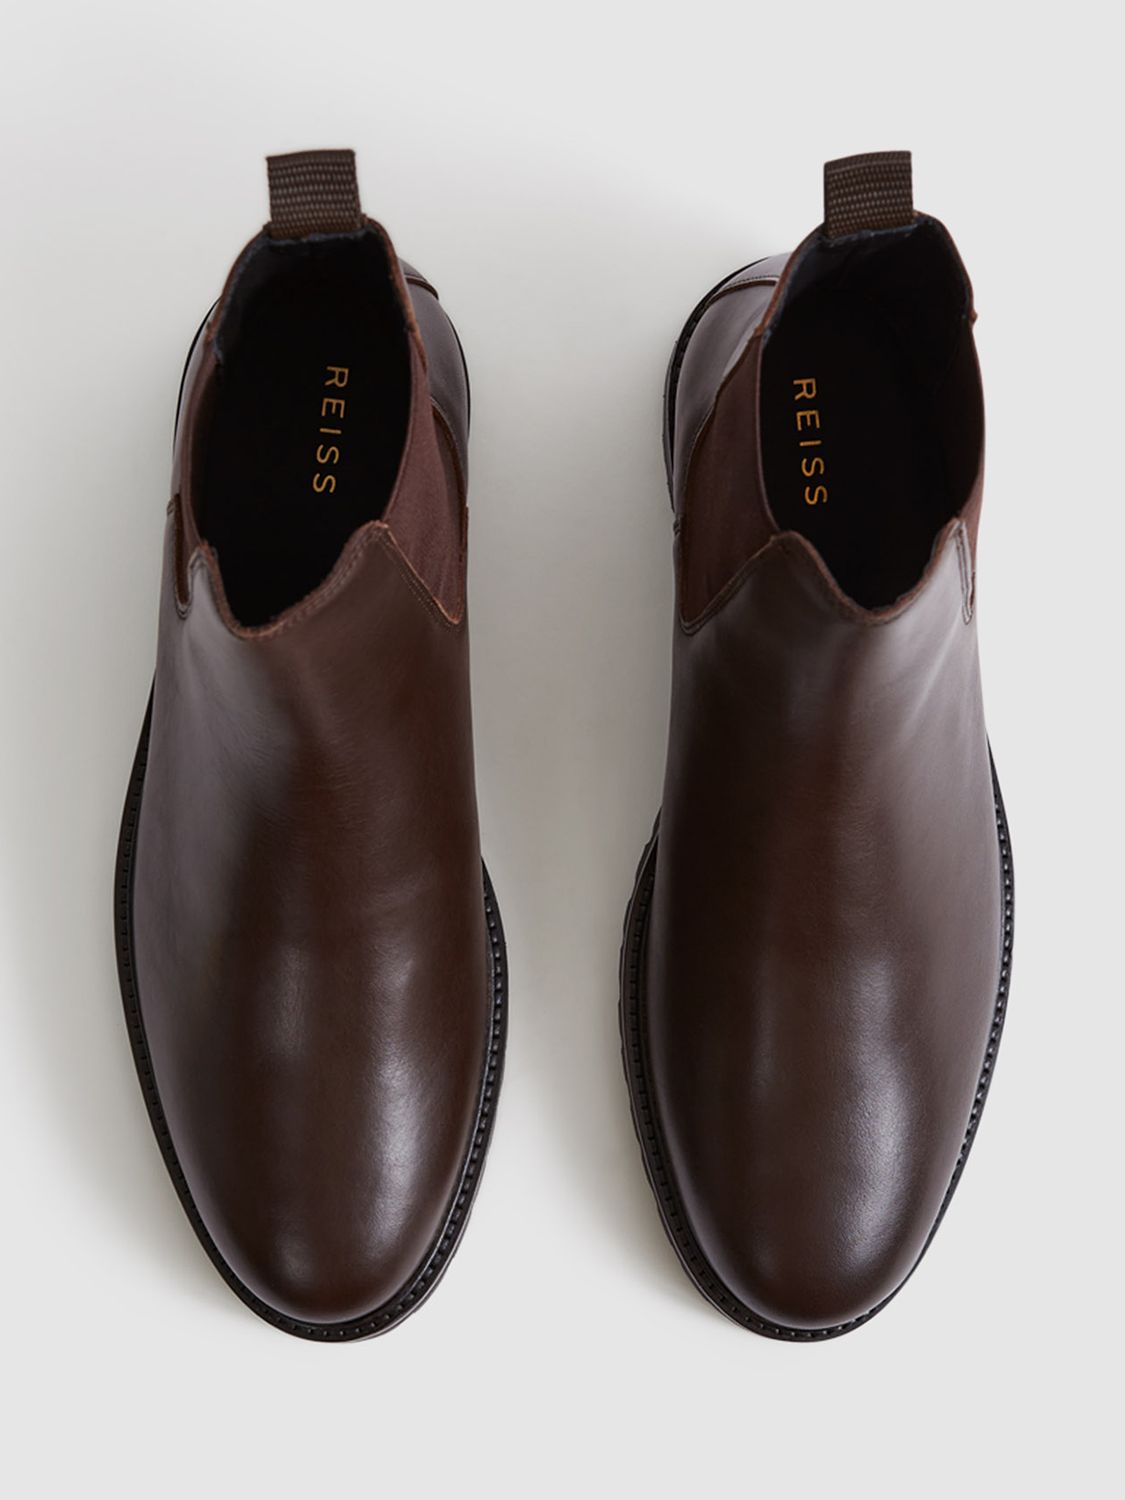 Reiss Chiltern Chelsea Boots, Chocolate at John Lewis & Partners